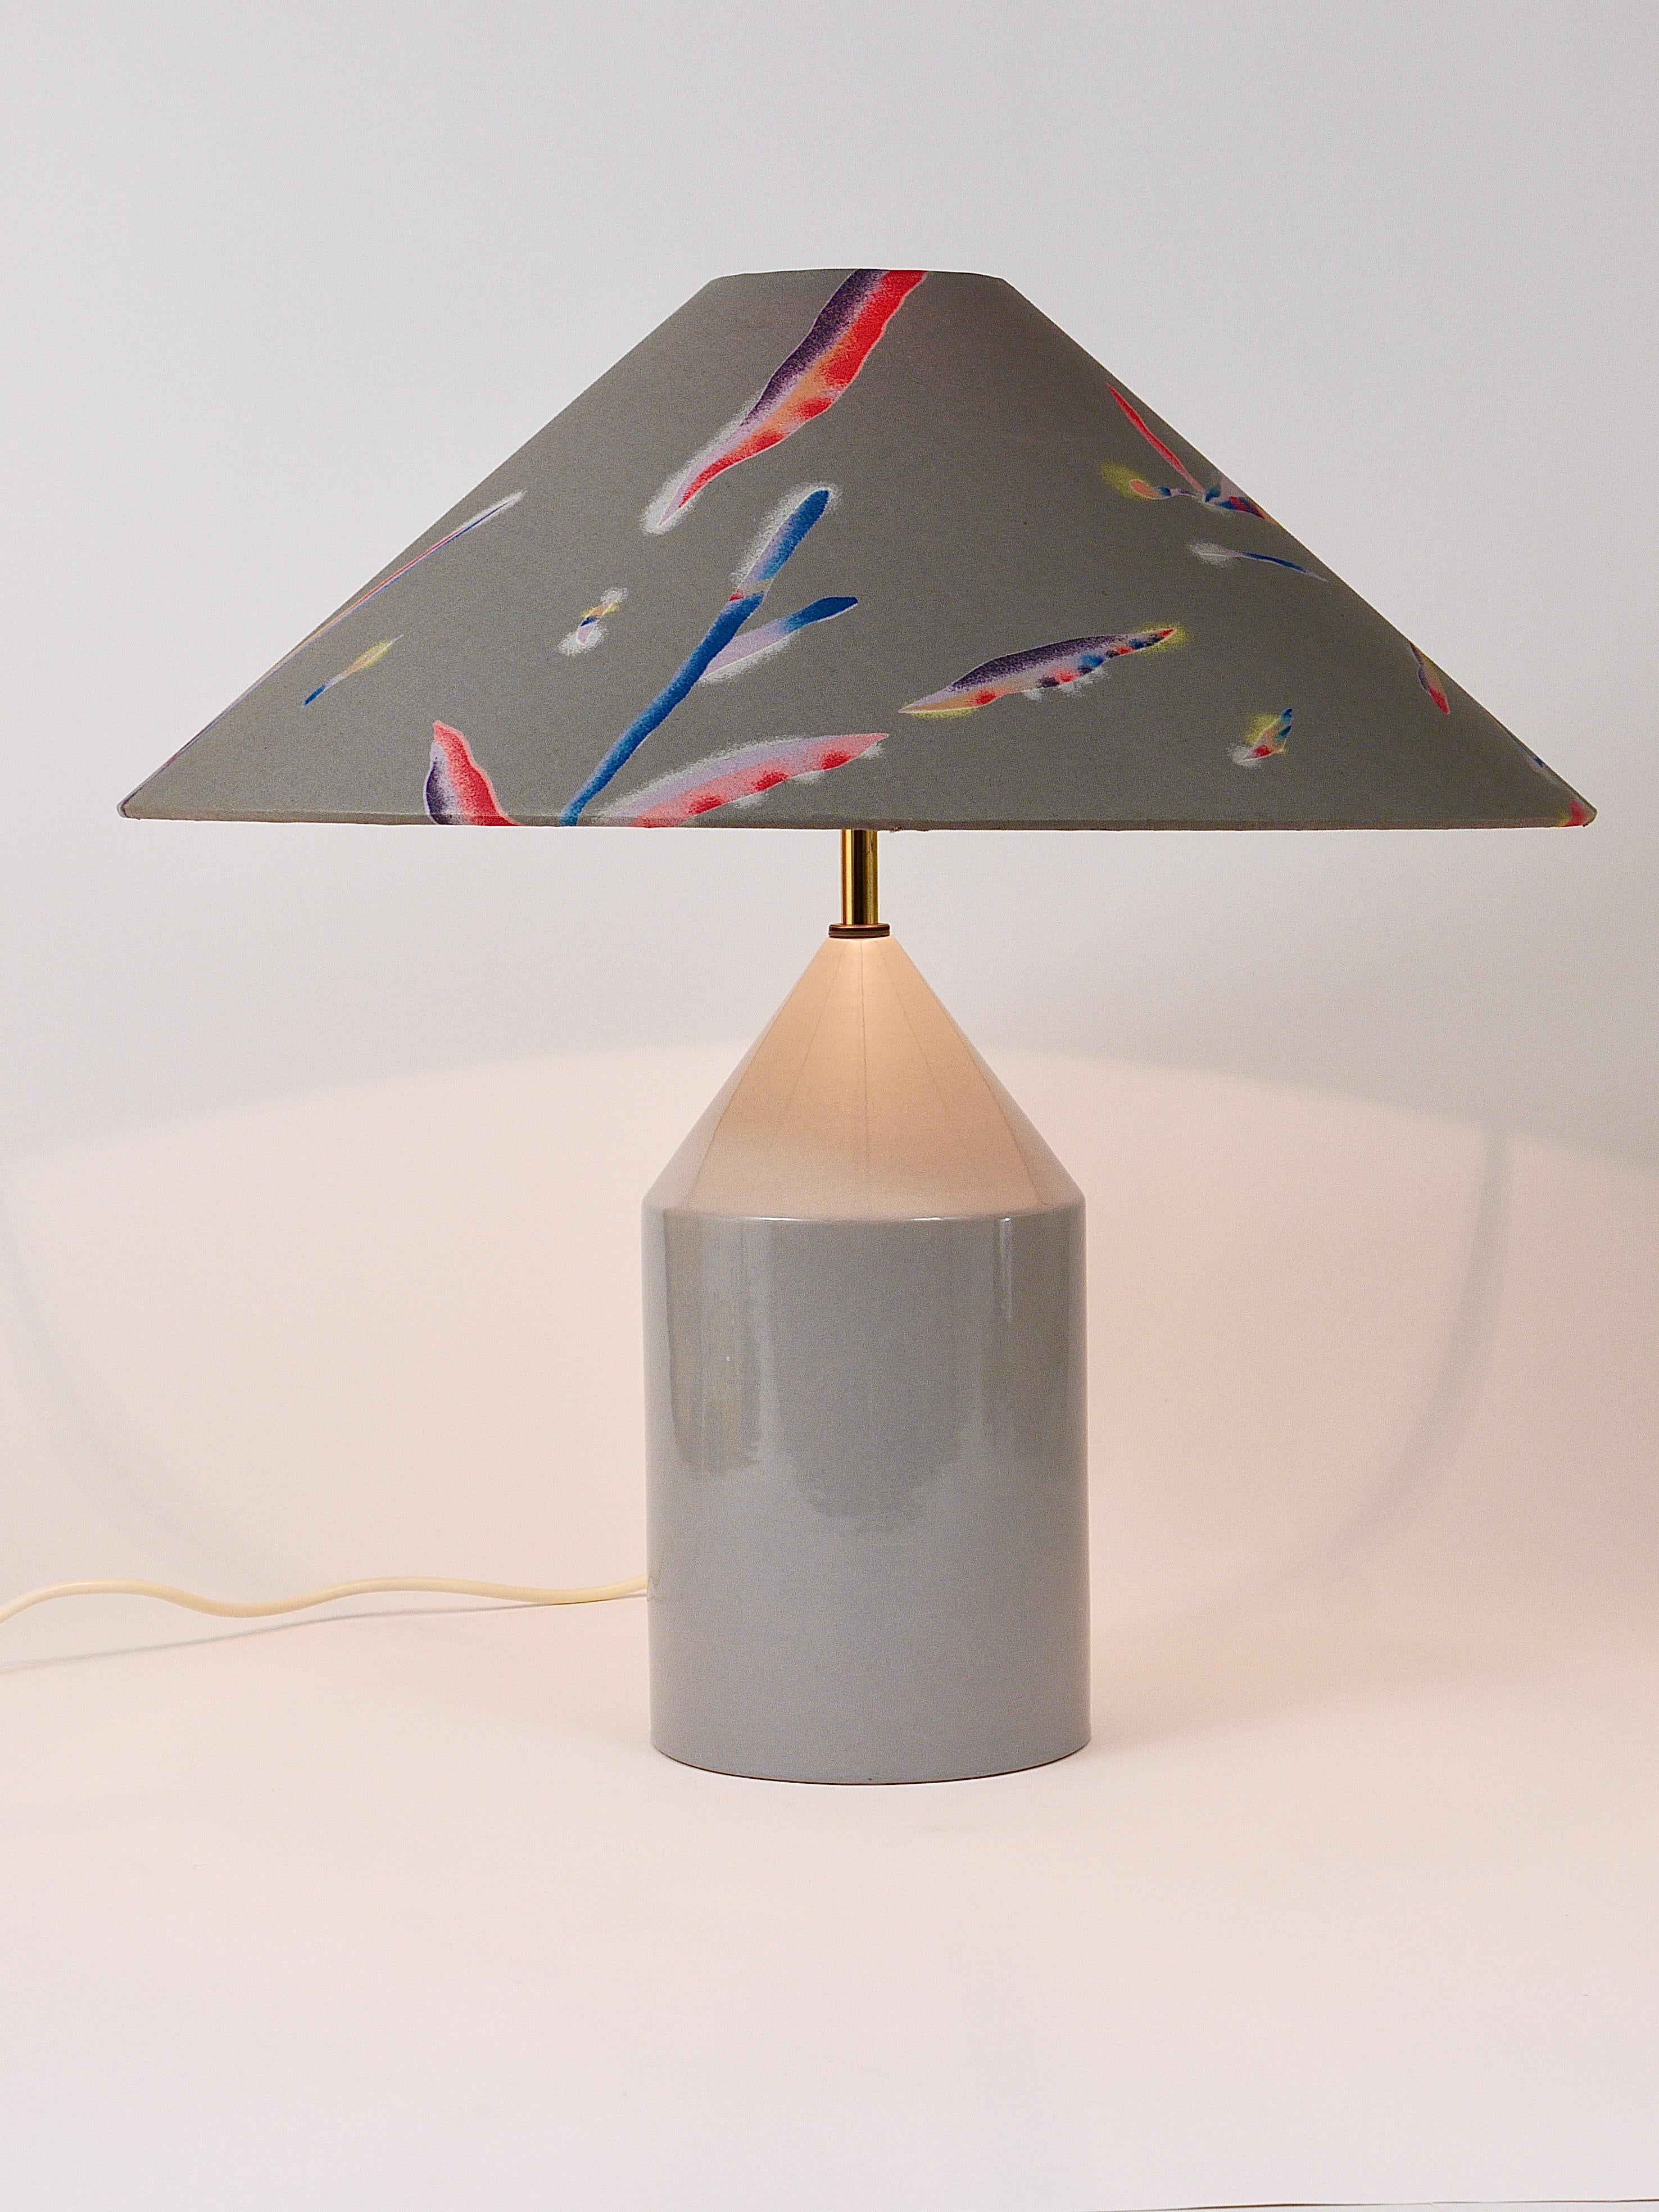 A beautiful Italian postmodern table lamp / side lamp from the 1980s. The lamps base is made of ceramic with a light-grey shiny glaze. It still has its original conical lampshade with an amazing floral and colorful 1980s pattern. In very good